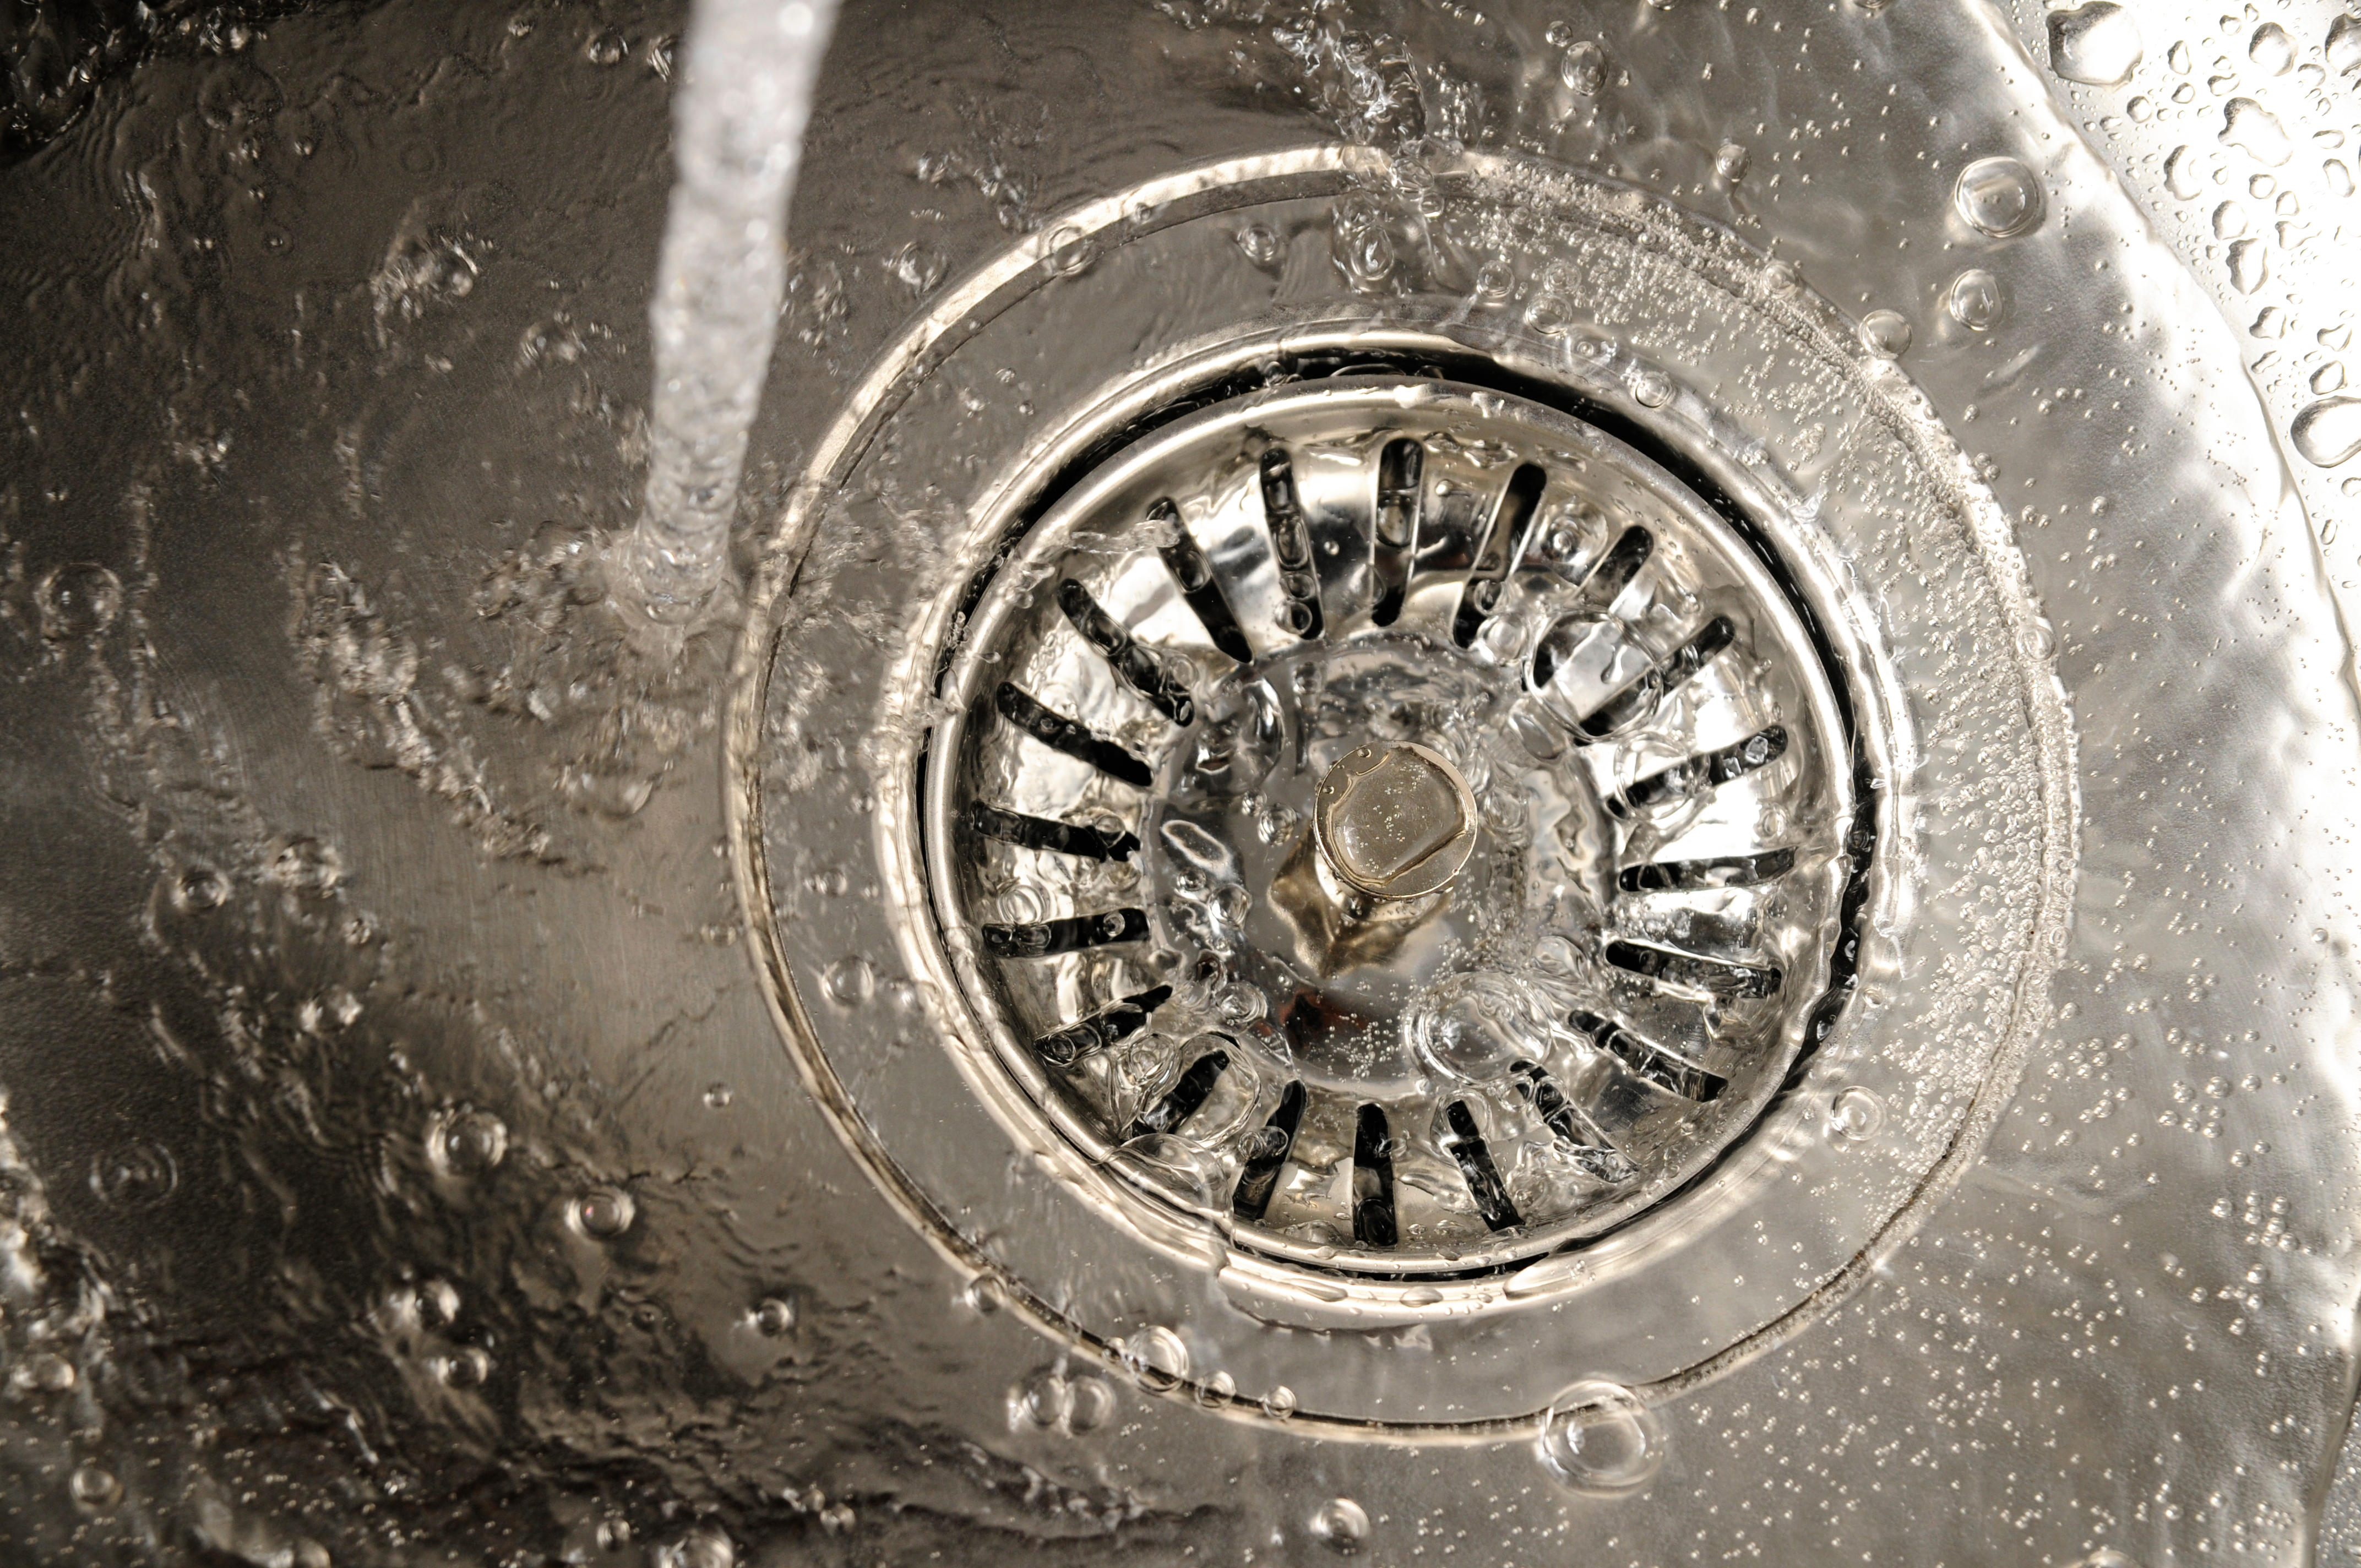 Kitchen Sink Not Draining- Here Are 8 Ways To Unclog It